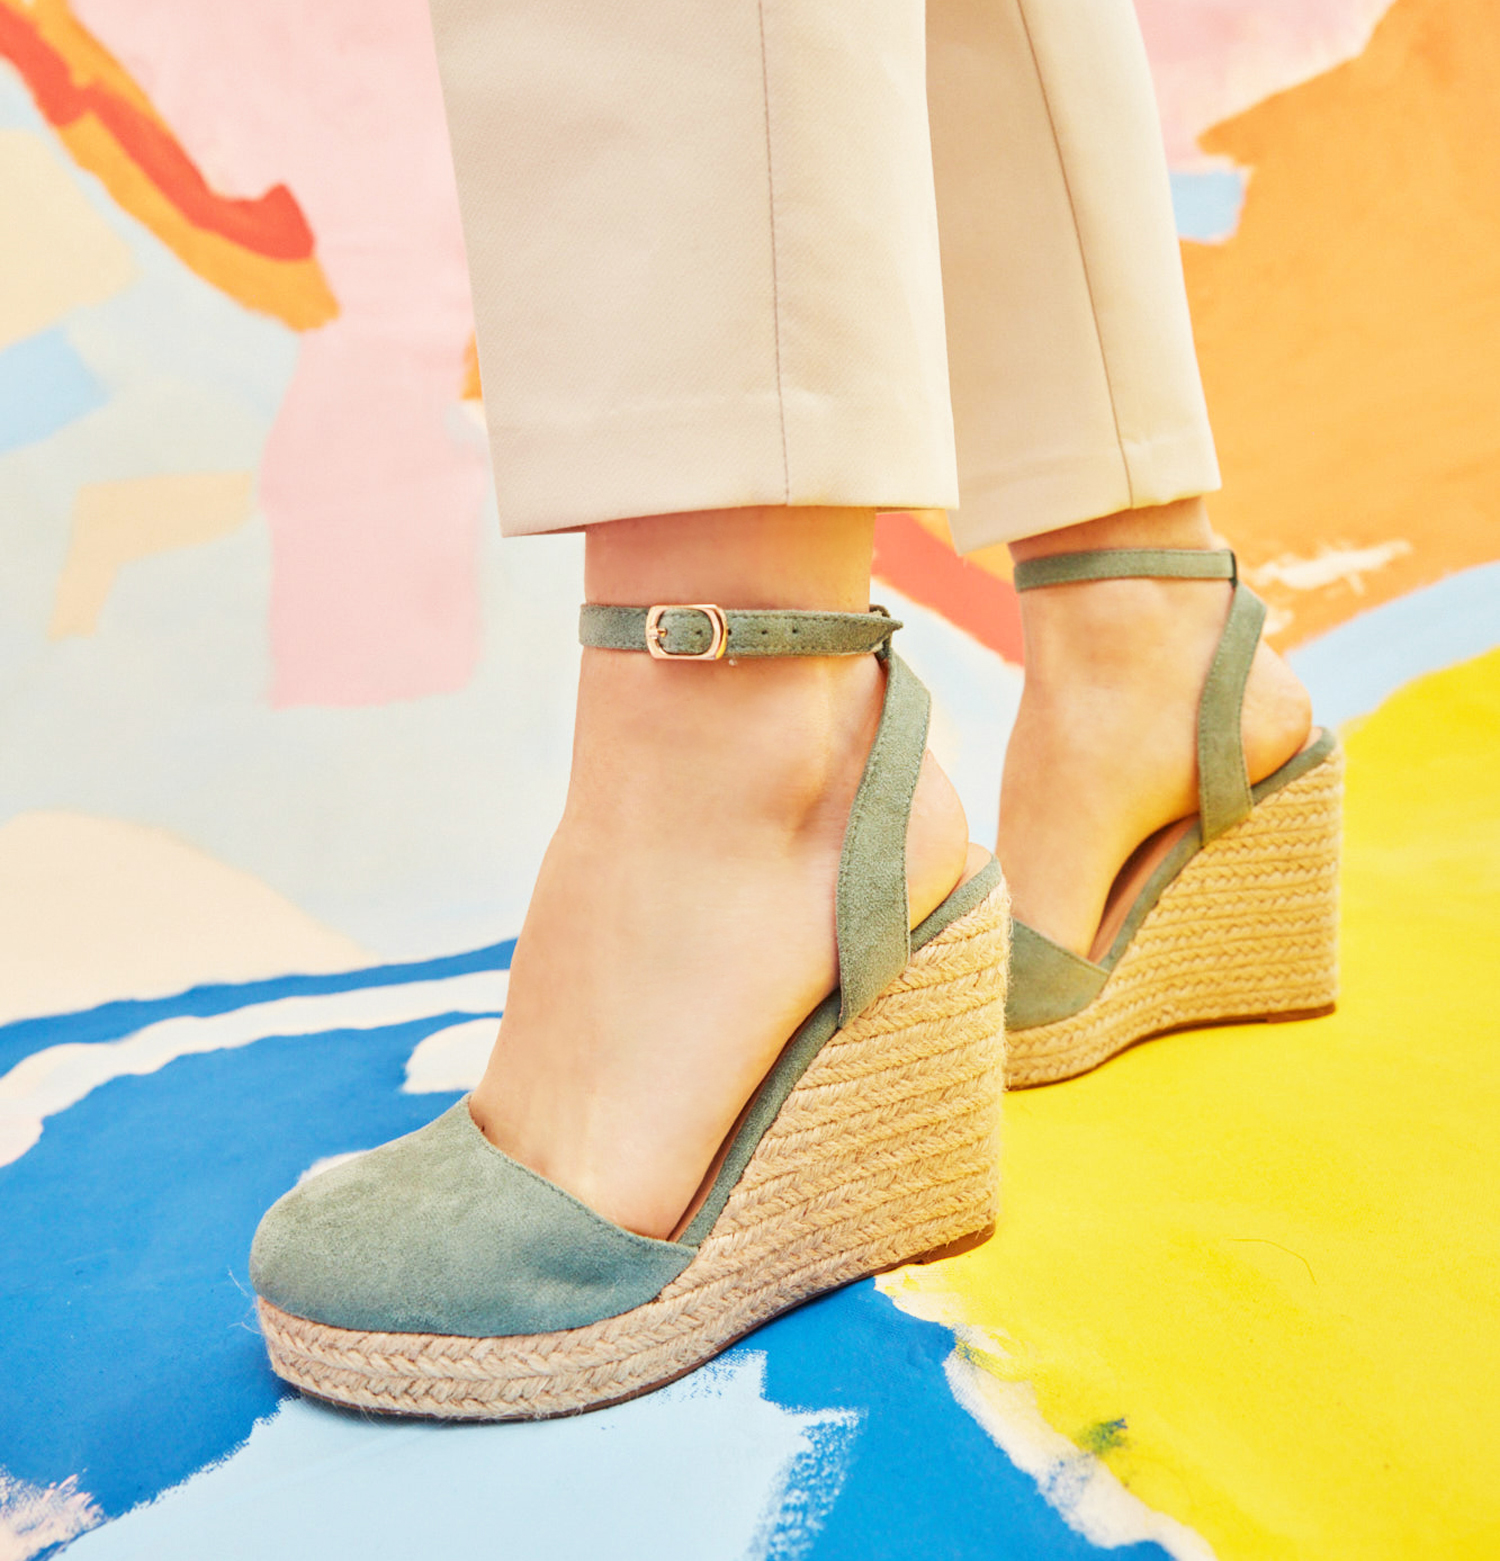 Turquoise Faux Suede Espadrilles with Jute Wedge 